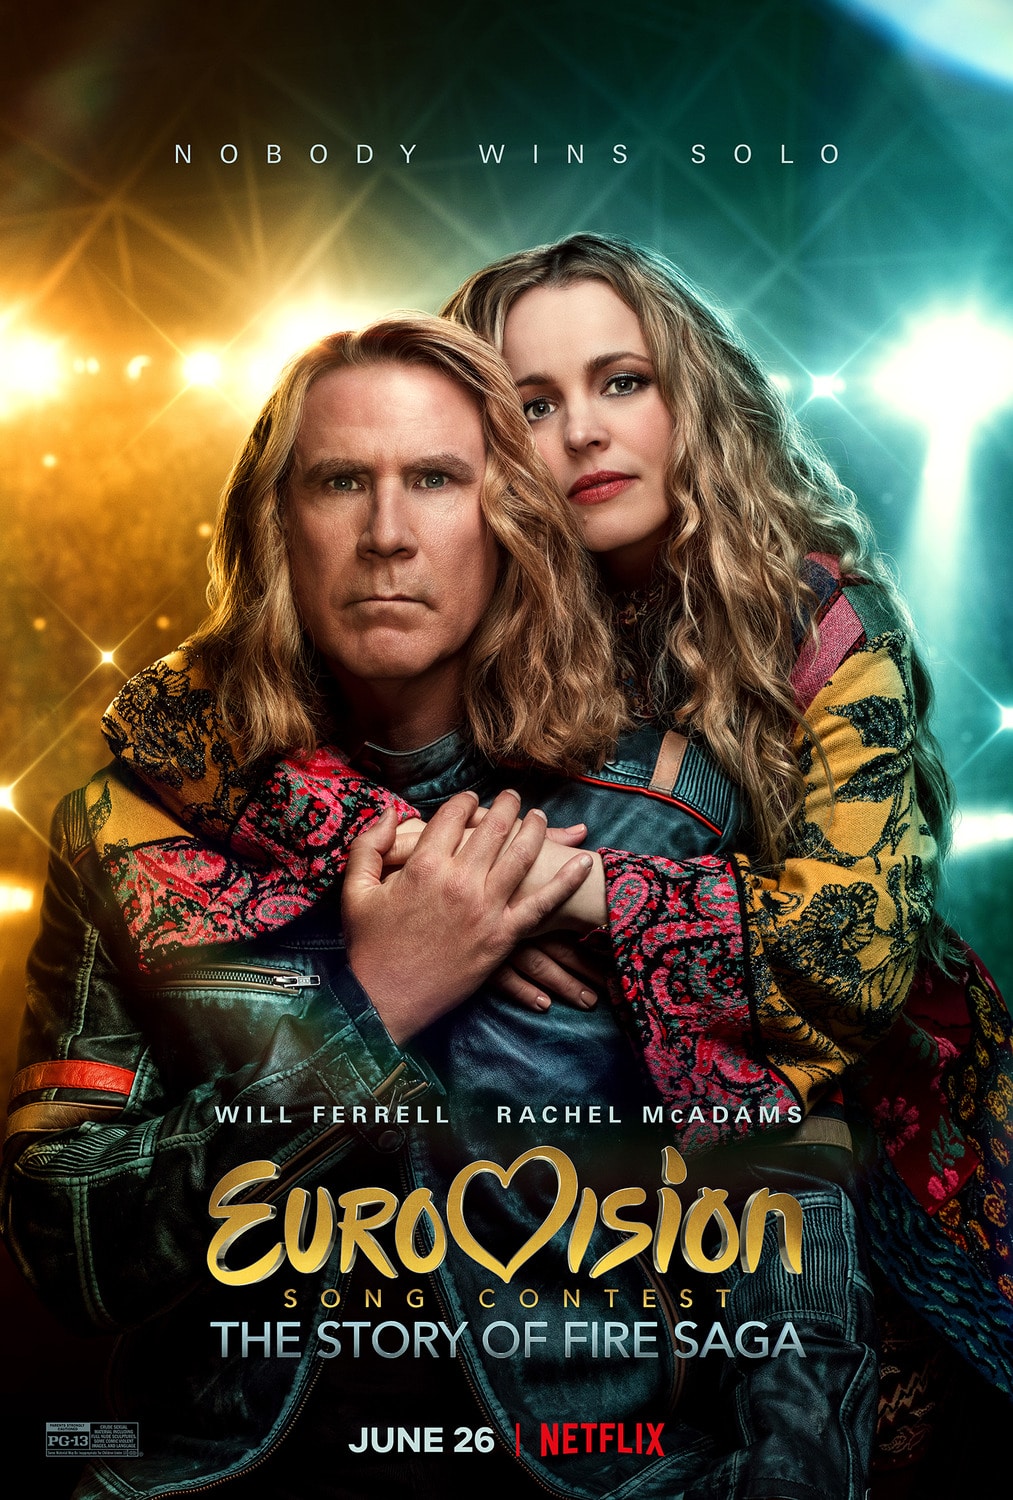 Netflix Eurovision Song Contest The Story of Fire Saga Trailer, Netflix Comedies, Netflix Will Ferrell Comedy, Coming to Netflix in June 2020